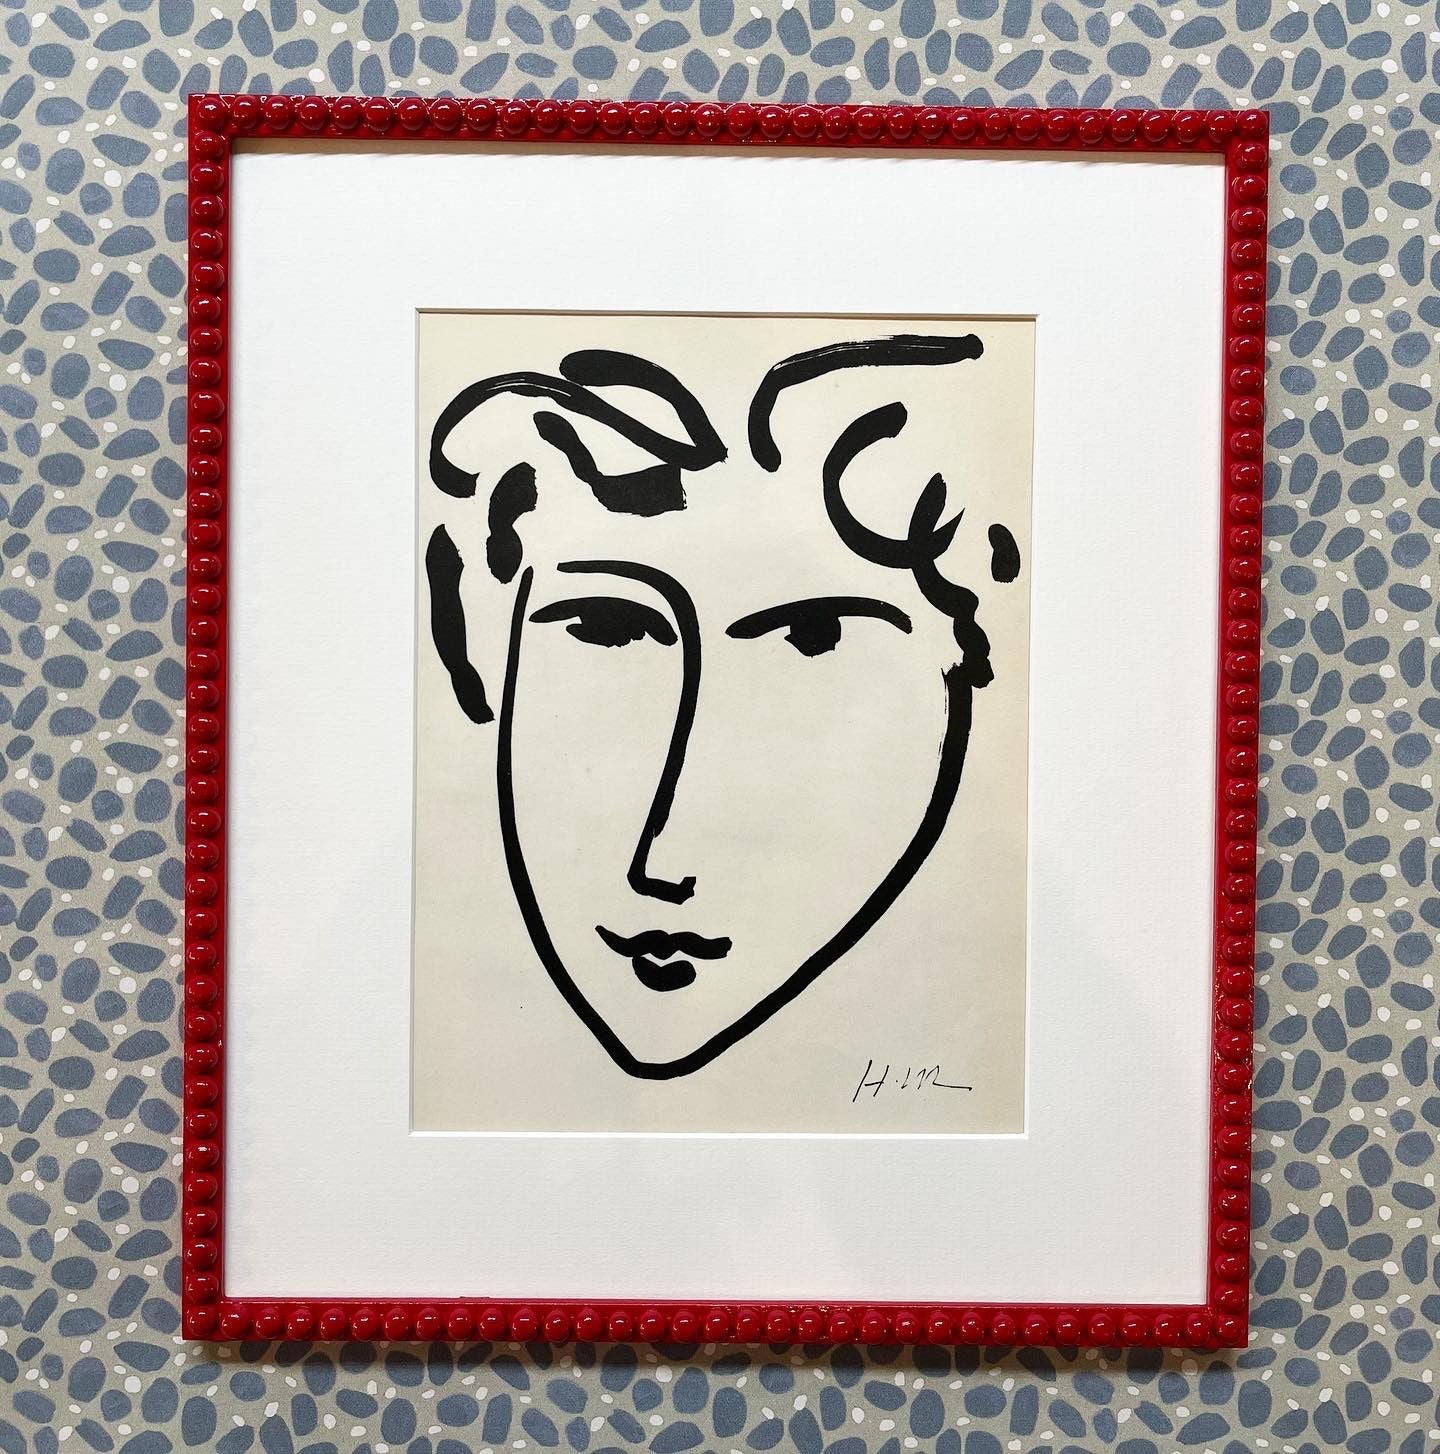 A Set of Three Heliogravure Prints of Portrait Heads of a Women after Drawings by Henri Matisse Published in Paris in the 1950s